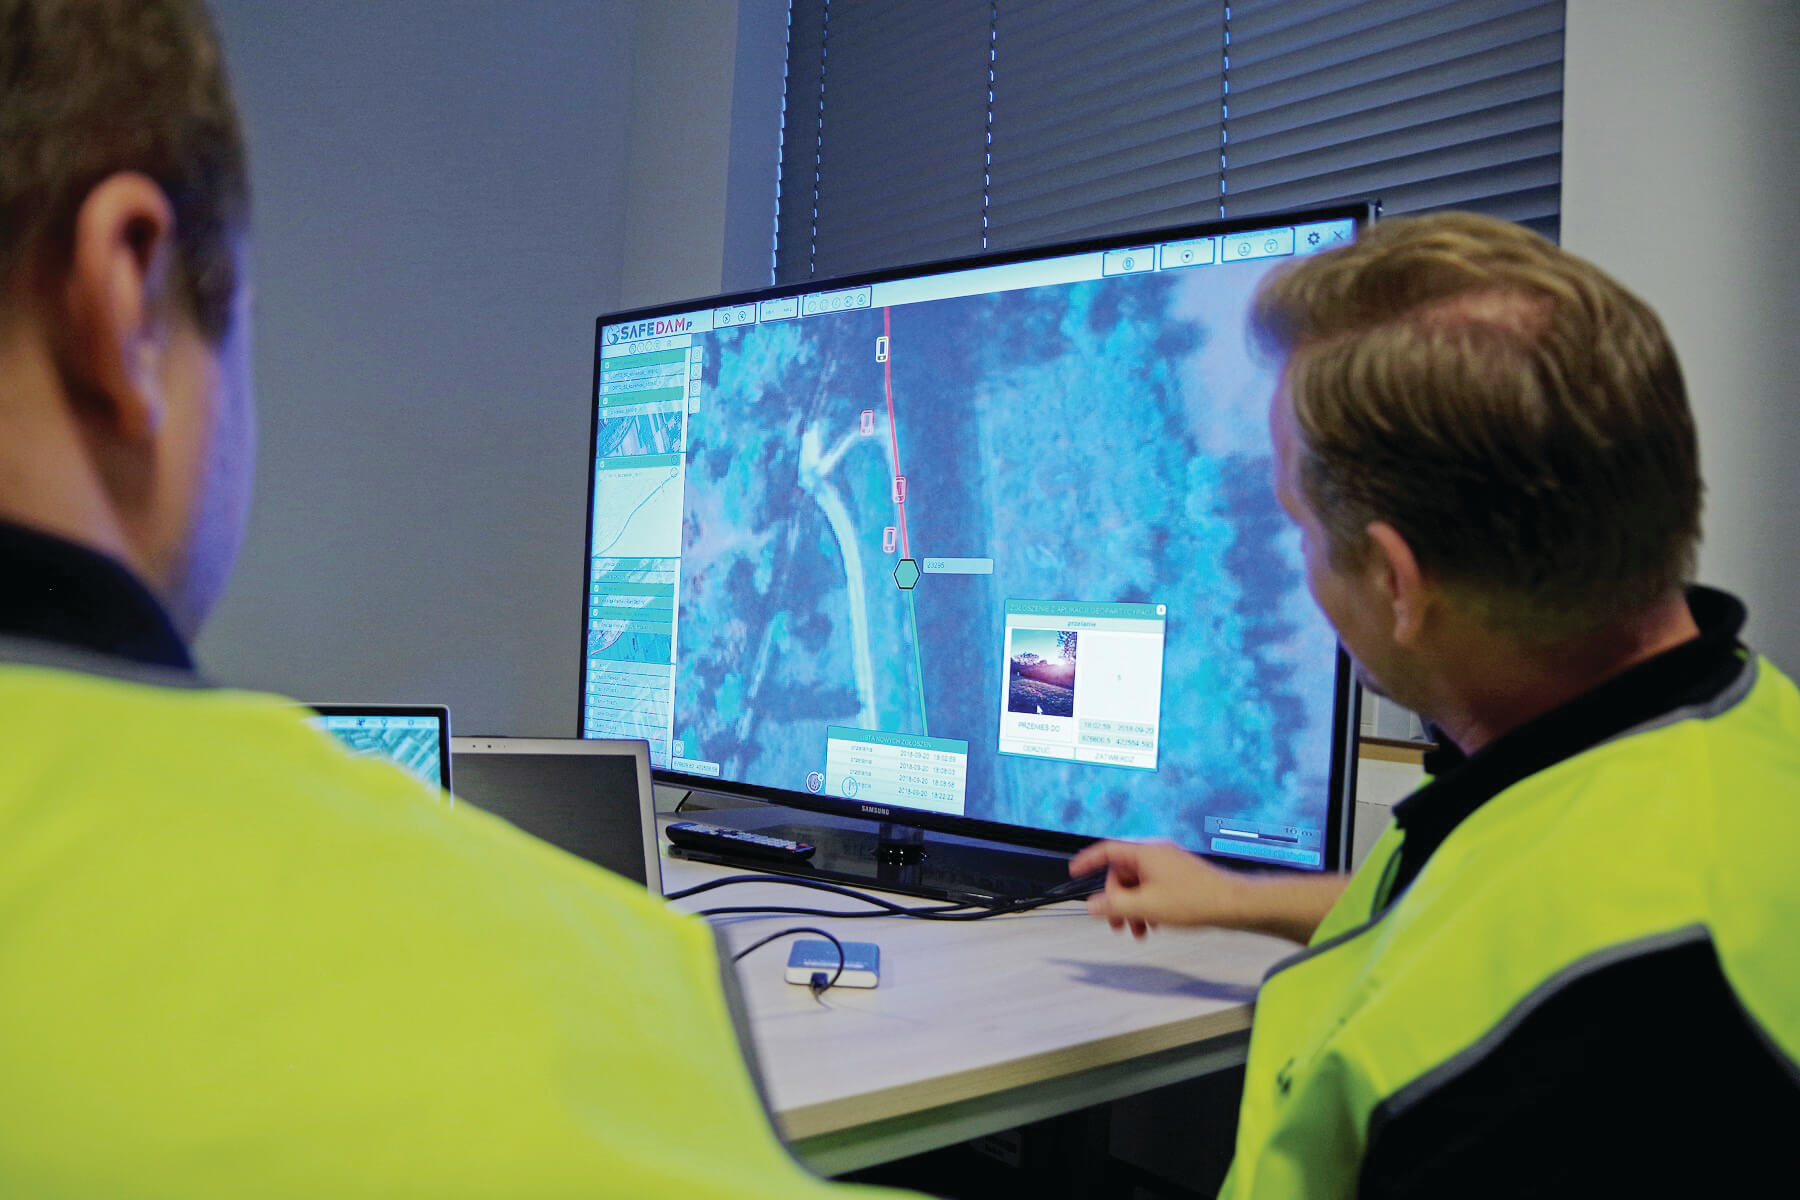 Two men in yellow reflective vests follow the data from the SAFEDAM system on a computer monitor